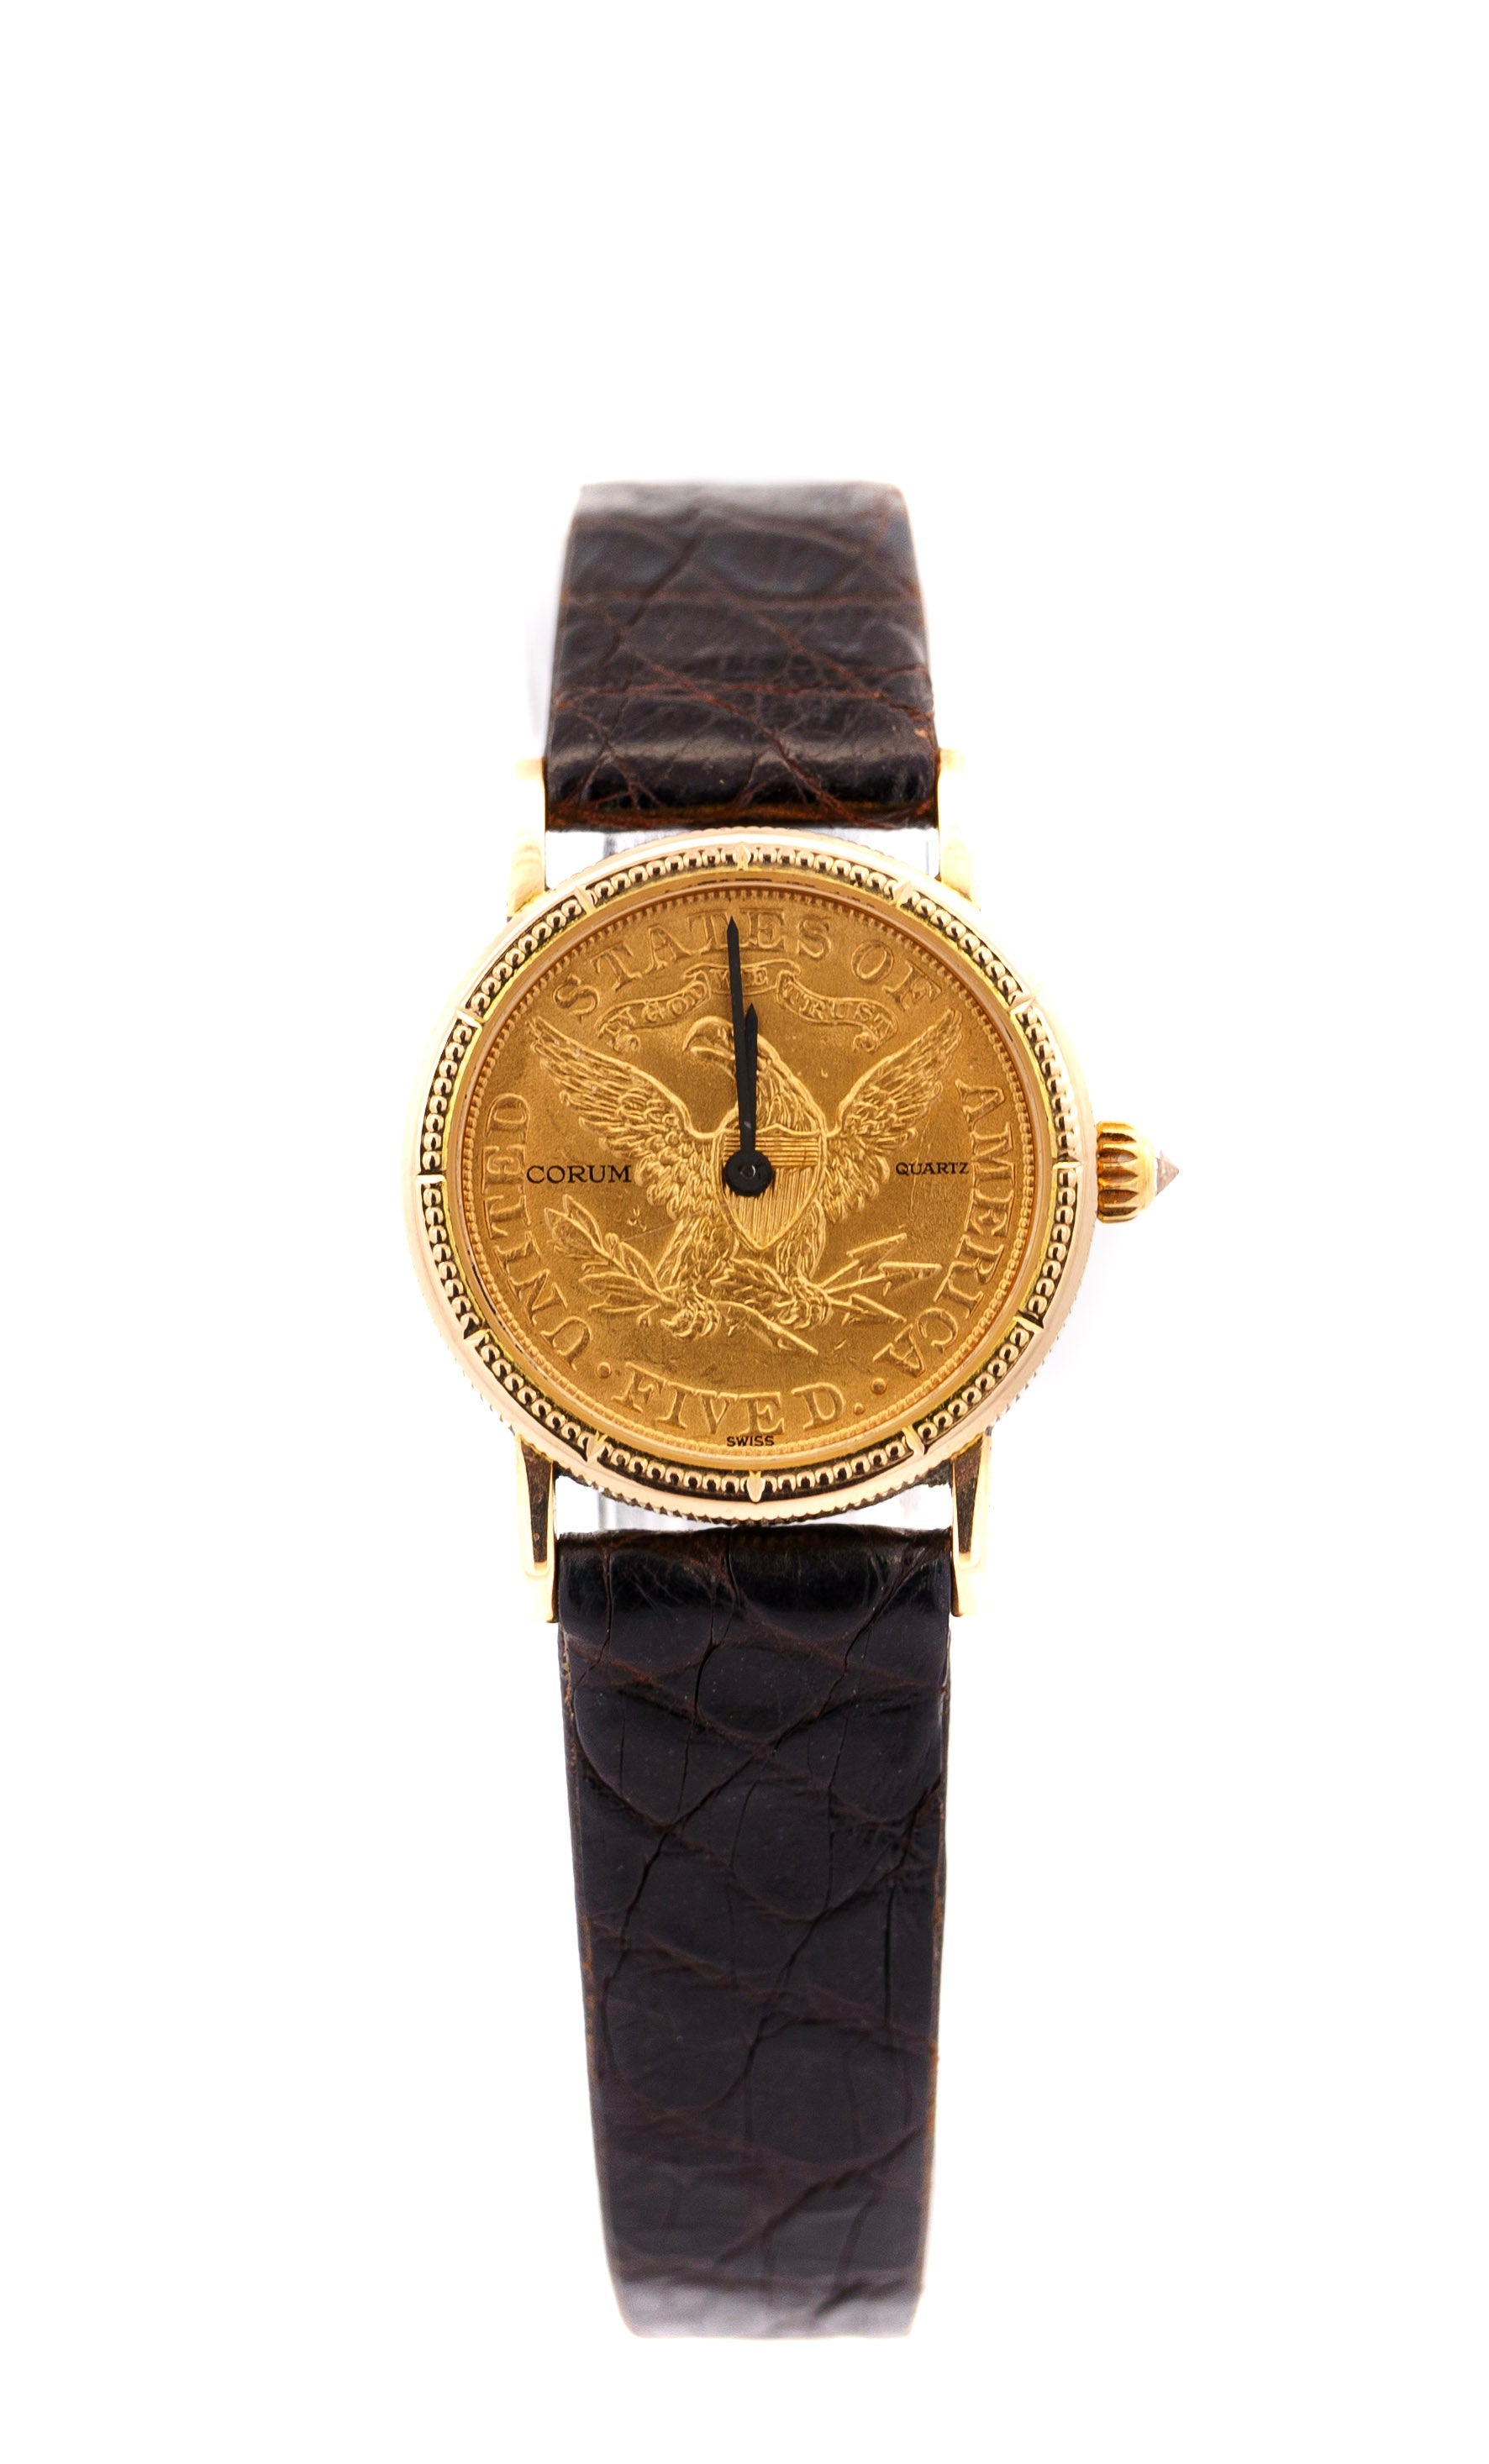 Vintage-Corum-1899-5-Dollar-USA-Gold-Coin-Watch-Face-in-Original-Box-with-Crocodile-Strap-Watches.jpg